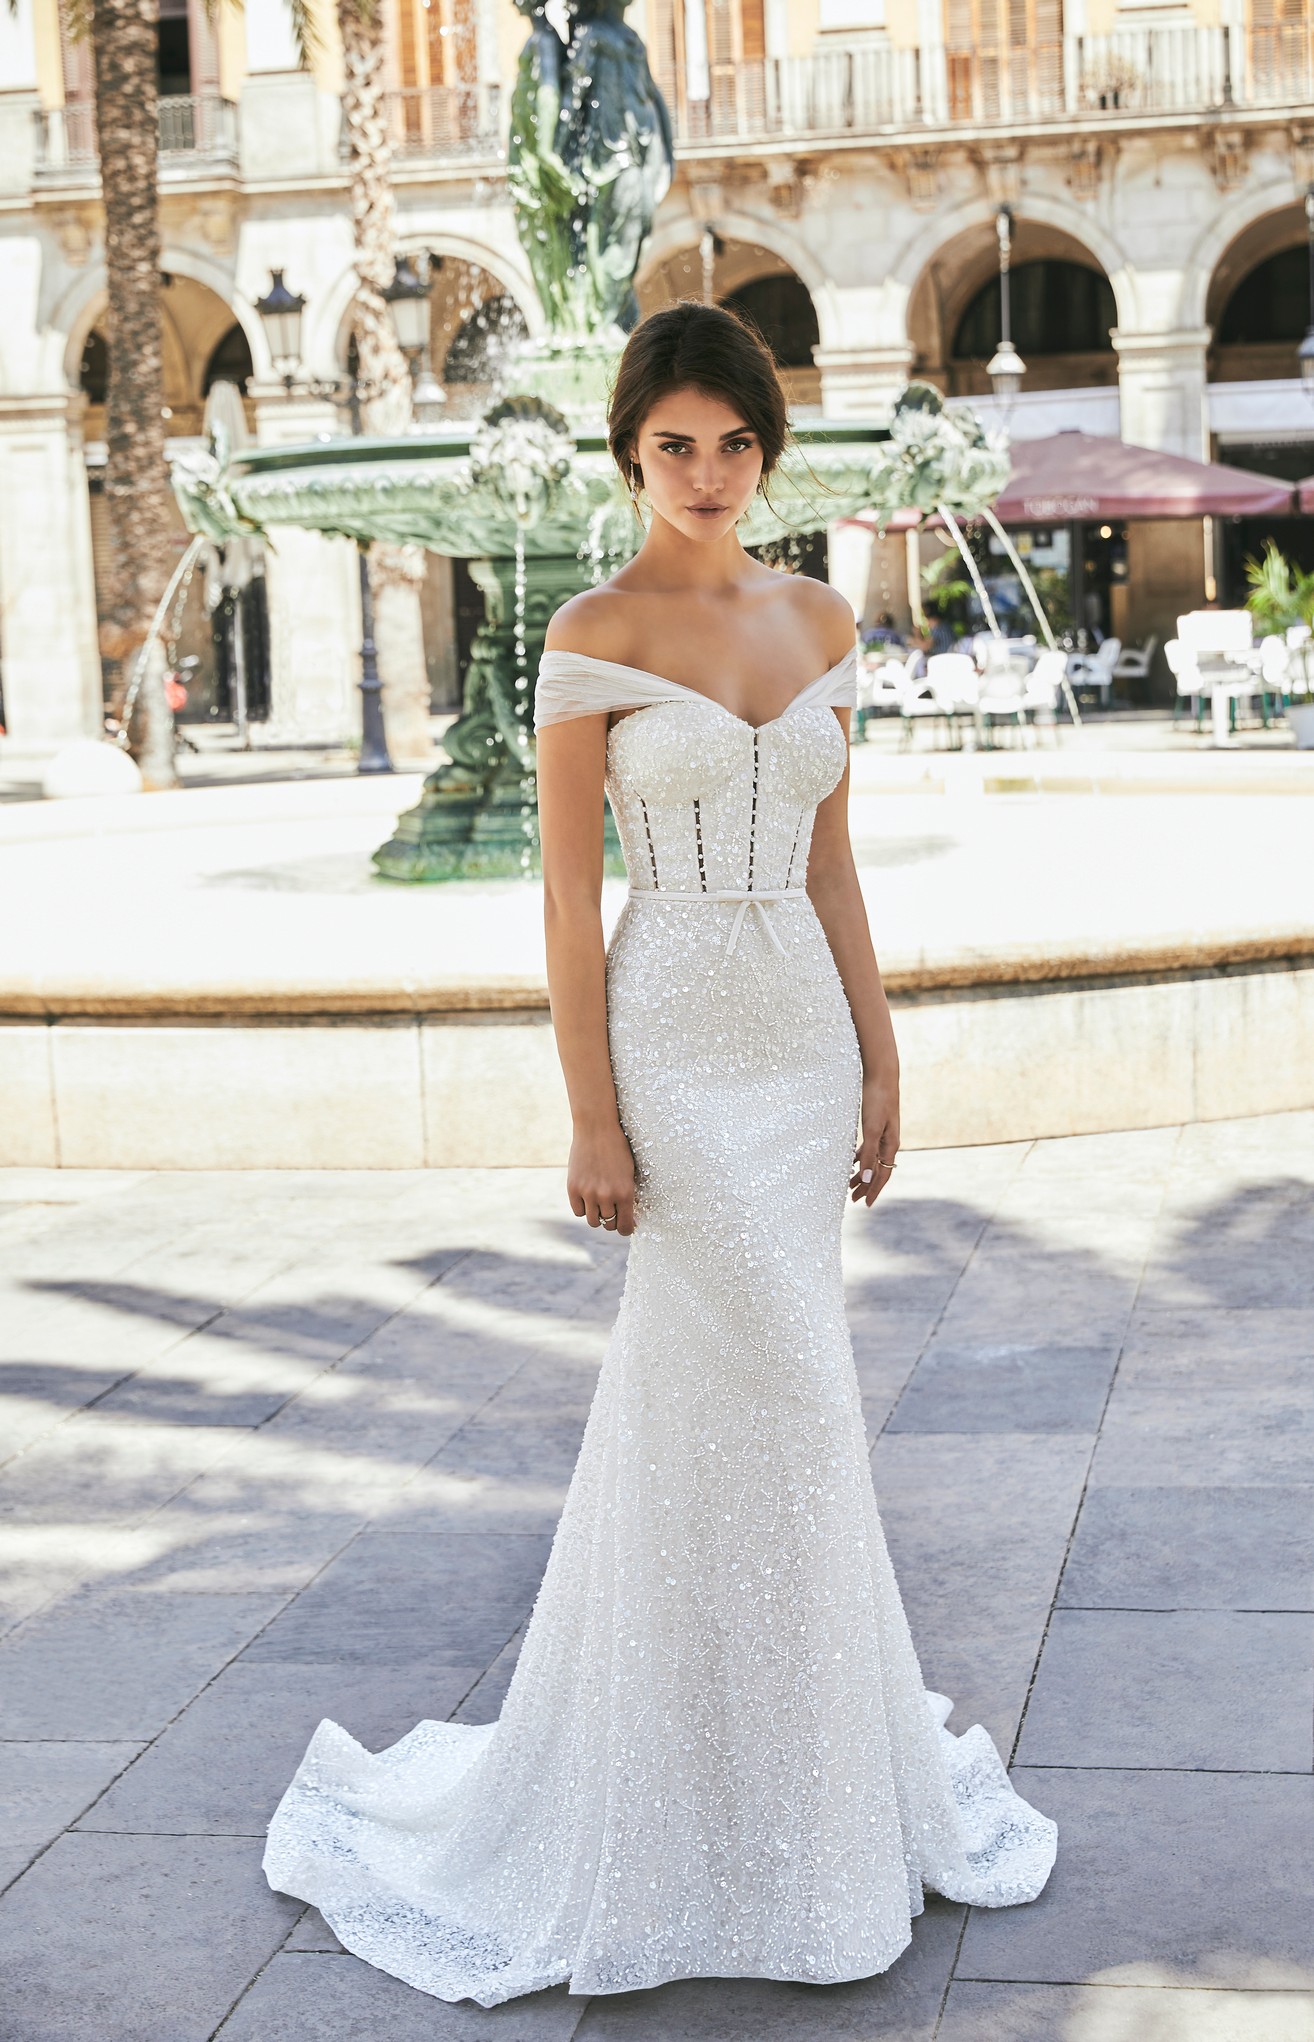 Brunette model stood by a sunny green street fountain in Ronald Joyce 69722, a sparkly fit and flare wedding dress with a pearl-beaded and sequin bodice, sweetheart neckline, delicate bow waist belt and detachable off-the-shoulder sleeves